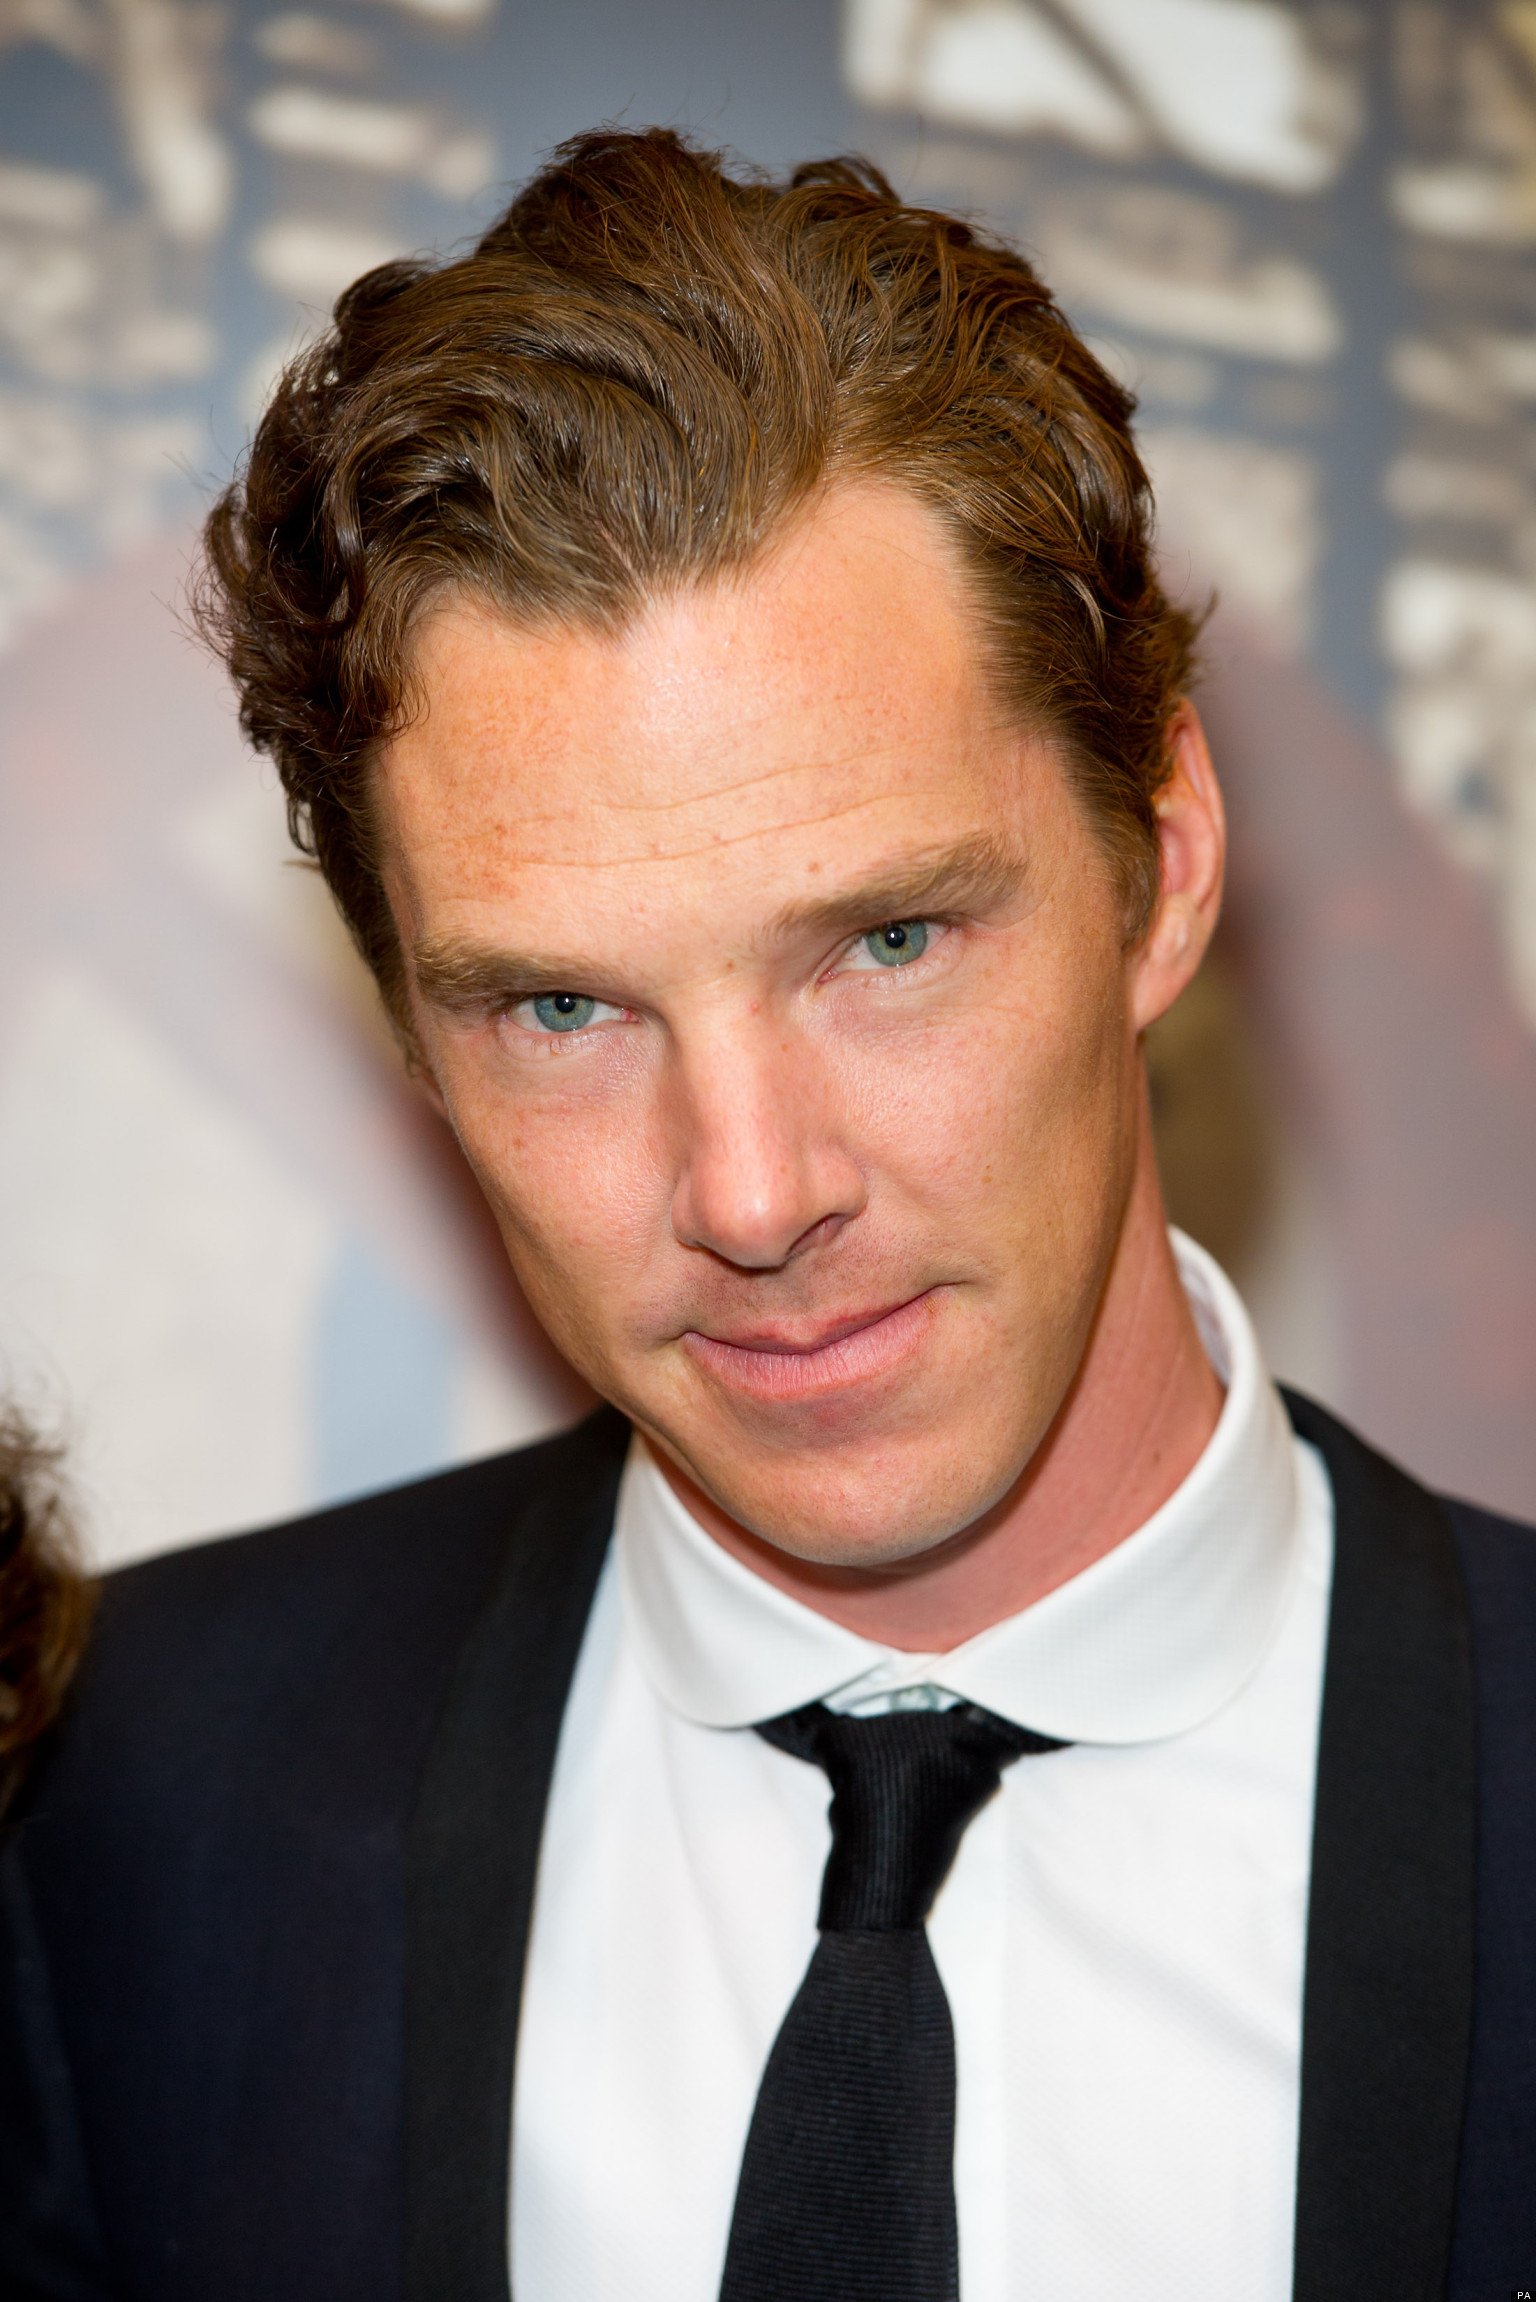 Benedict Cumberbatch attending the ITV Crfime Thriller Awards, at the Grosvenor hotel in central London.